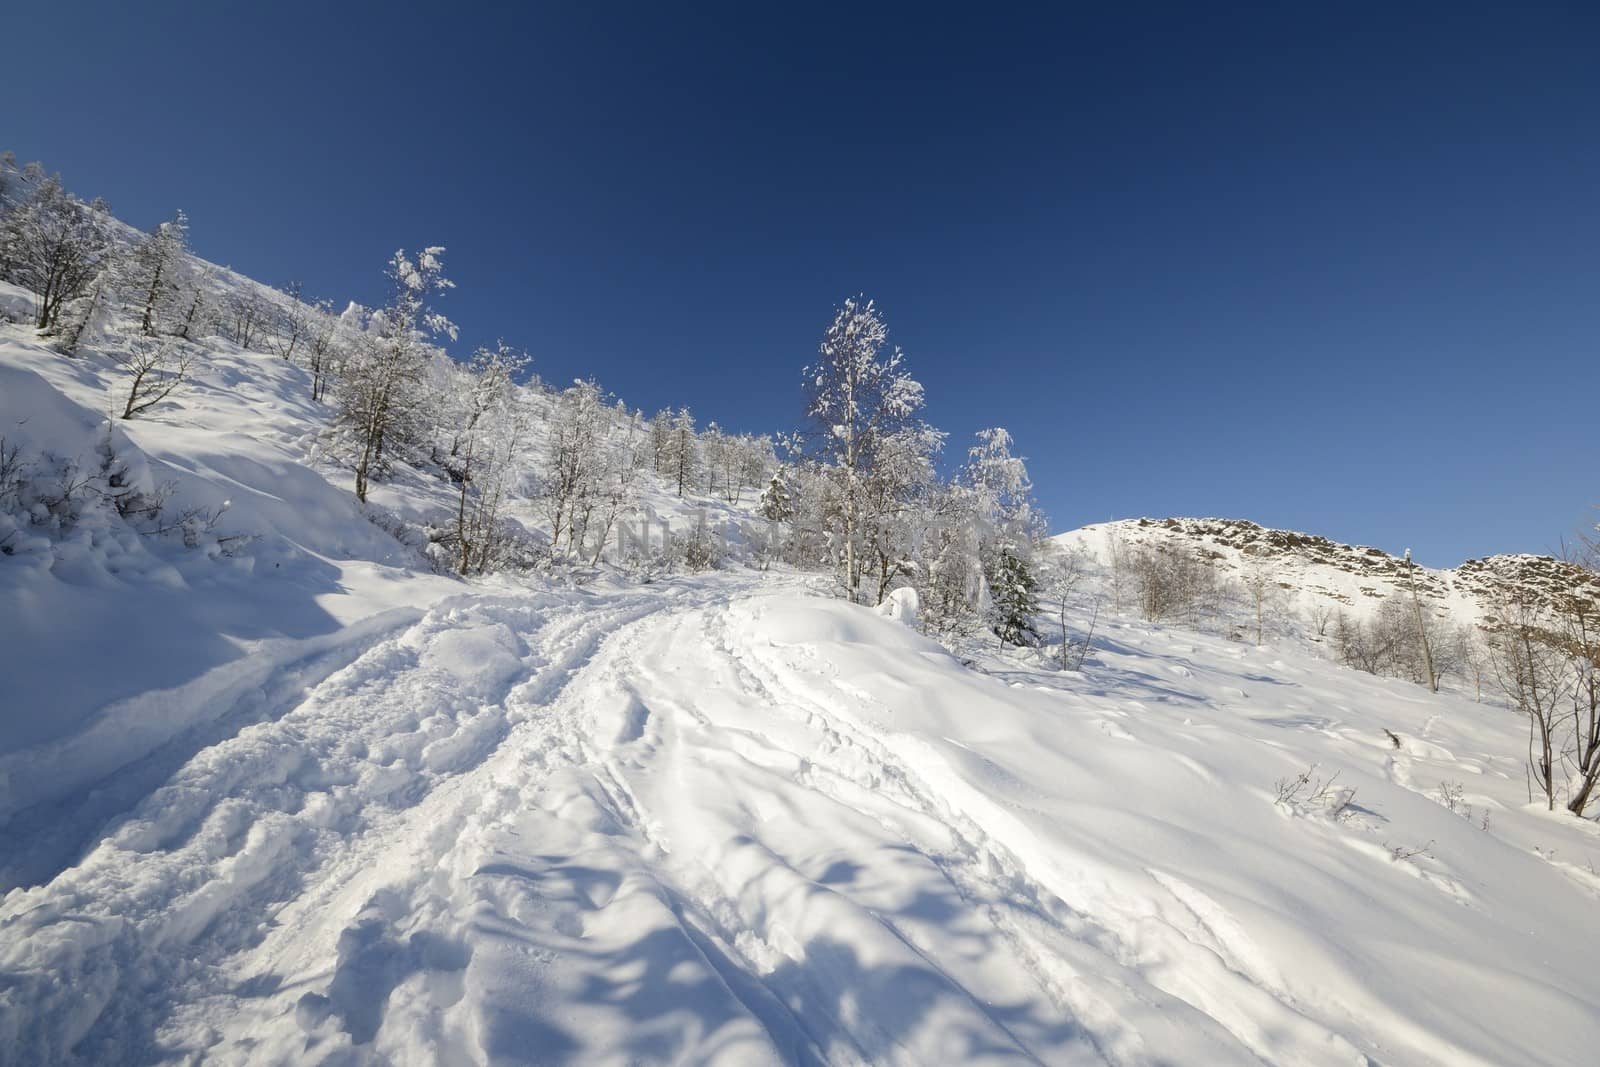 Ascent tour ski tracks on snowy slope with sparse larch and birch tree and winter scenic landscape